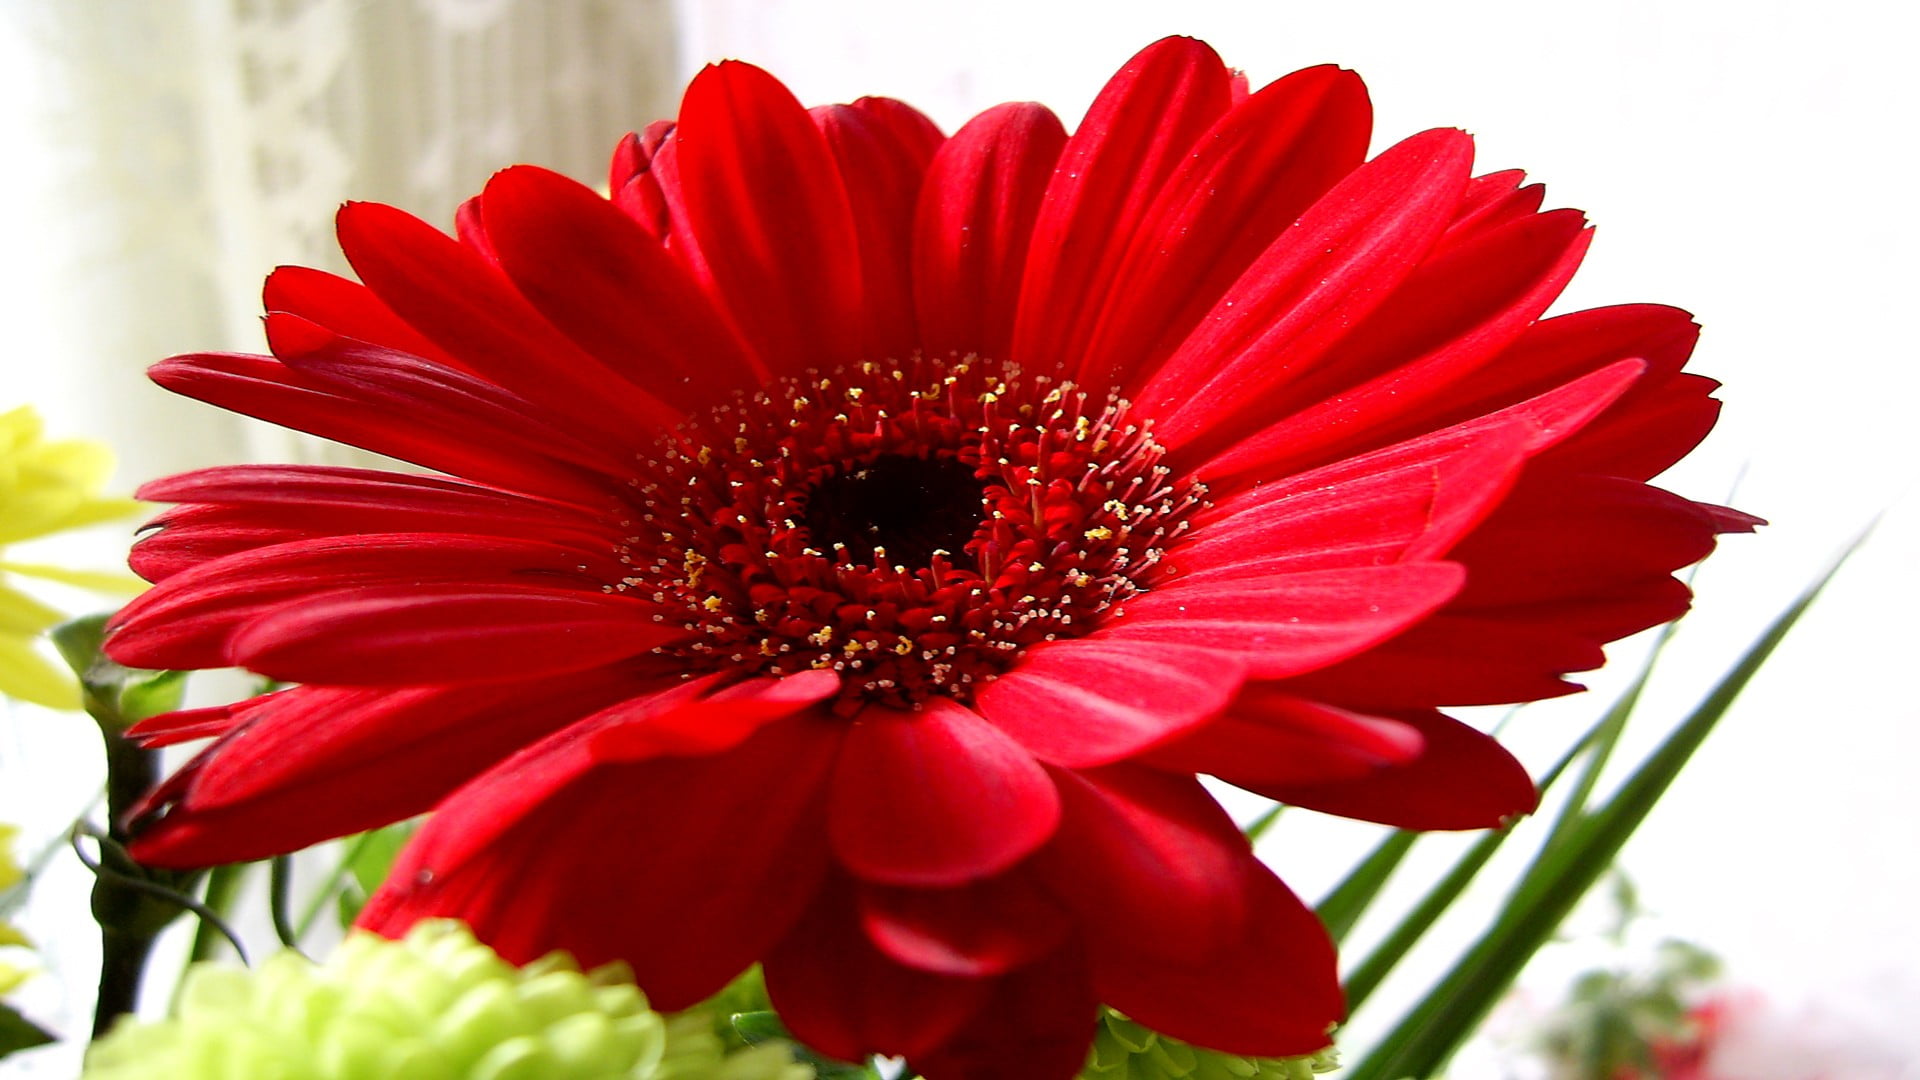 Red Gerbera Daisy Flower In Closeup Photo Hd Wallpaper Wallpaper Flare,Best Canned Cat Food For Constipation